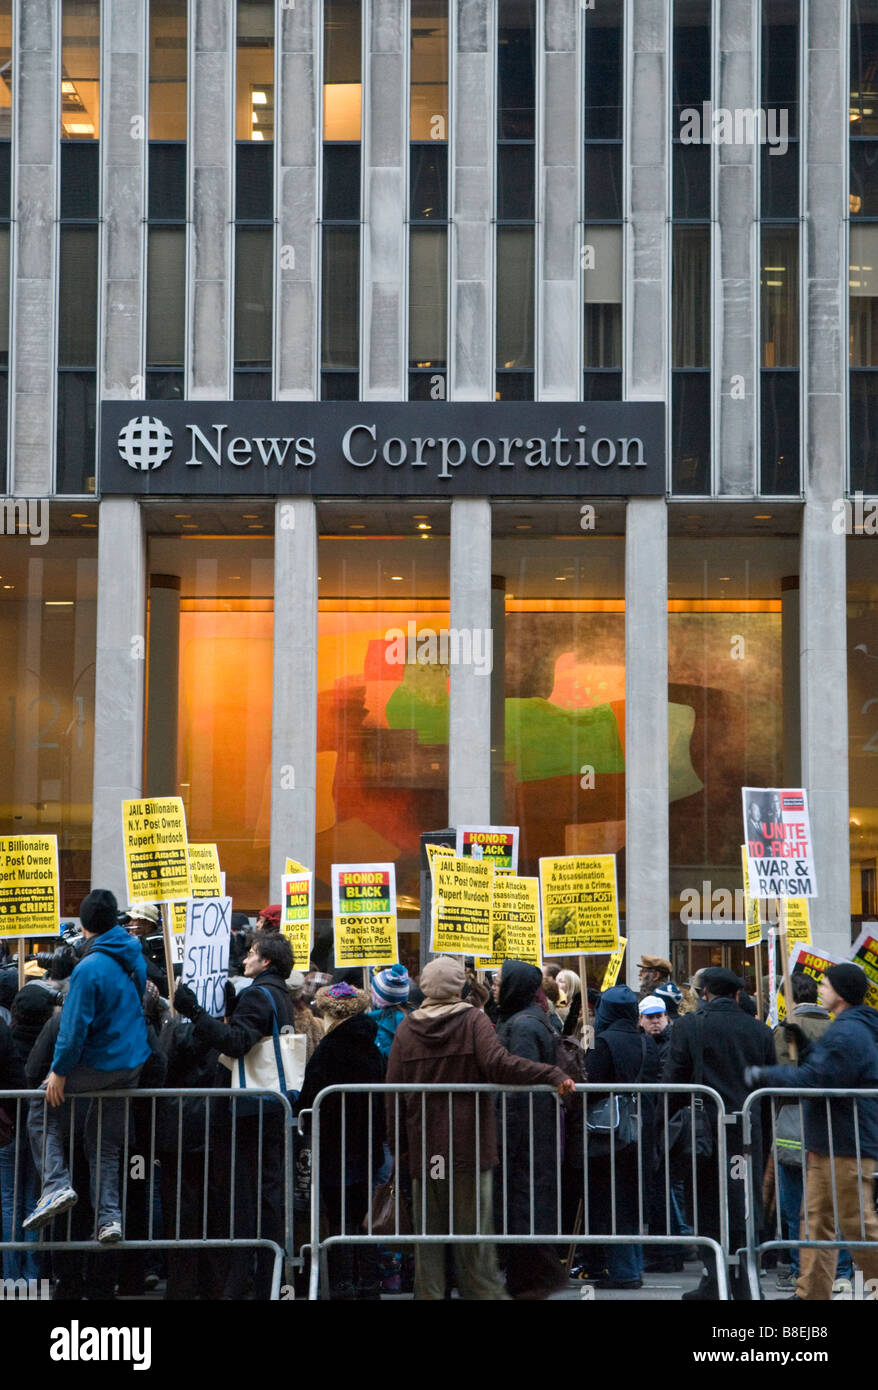 People gather outside the News Corporation on 2-20-09 to protest the publication of a racist cartoon in the NY Post Stock Photo